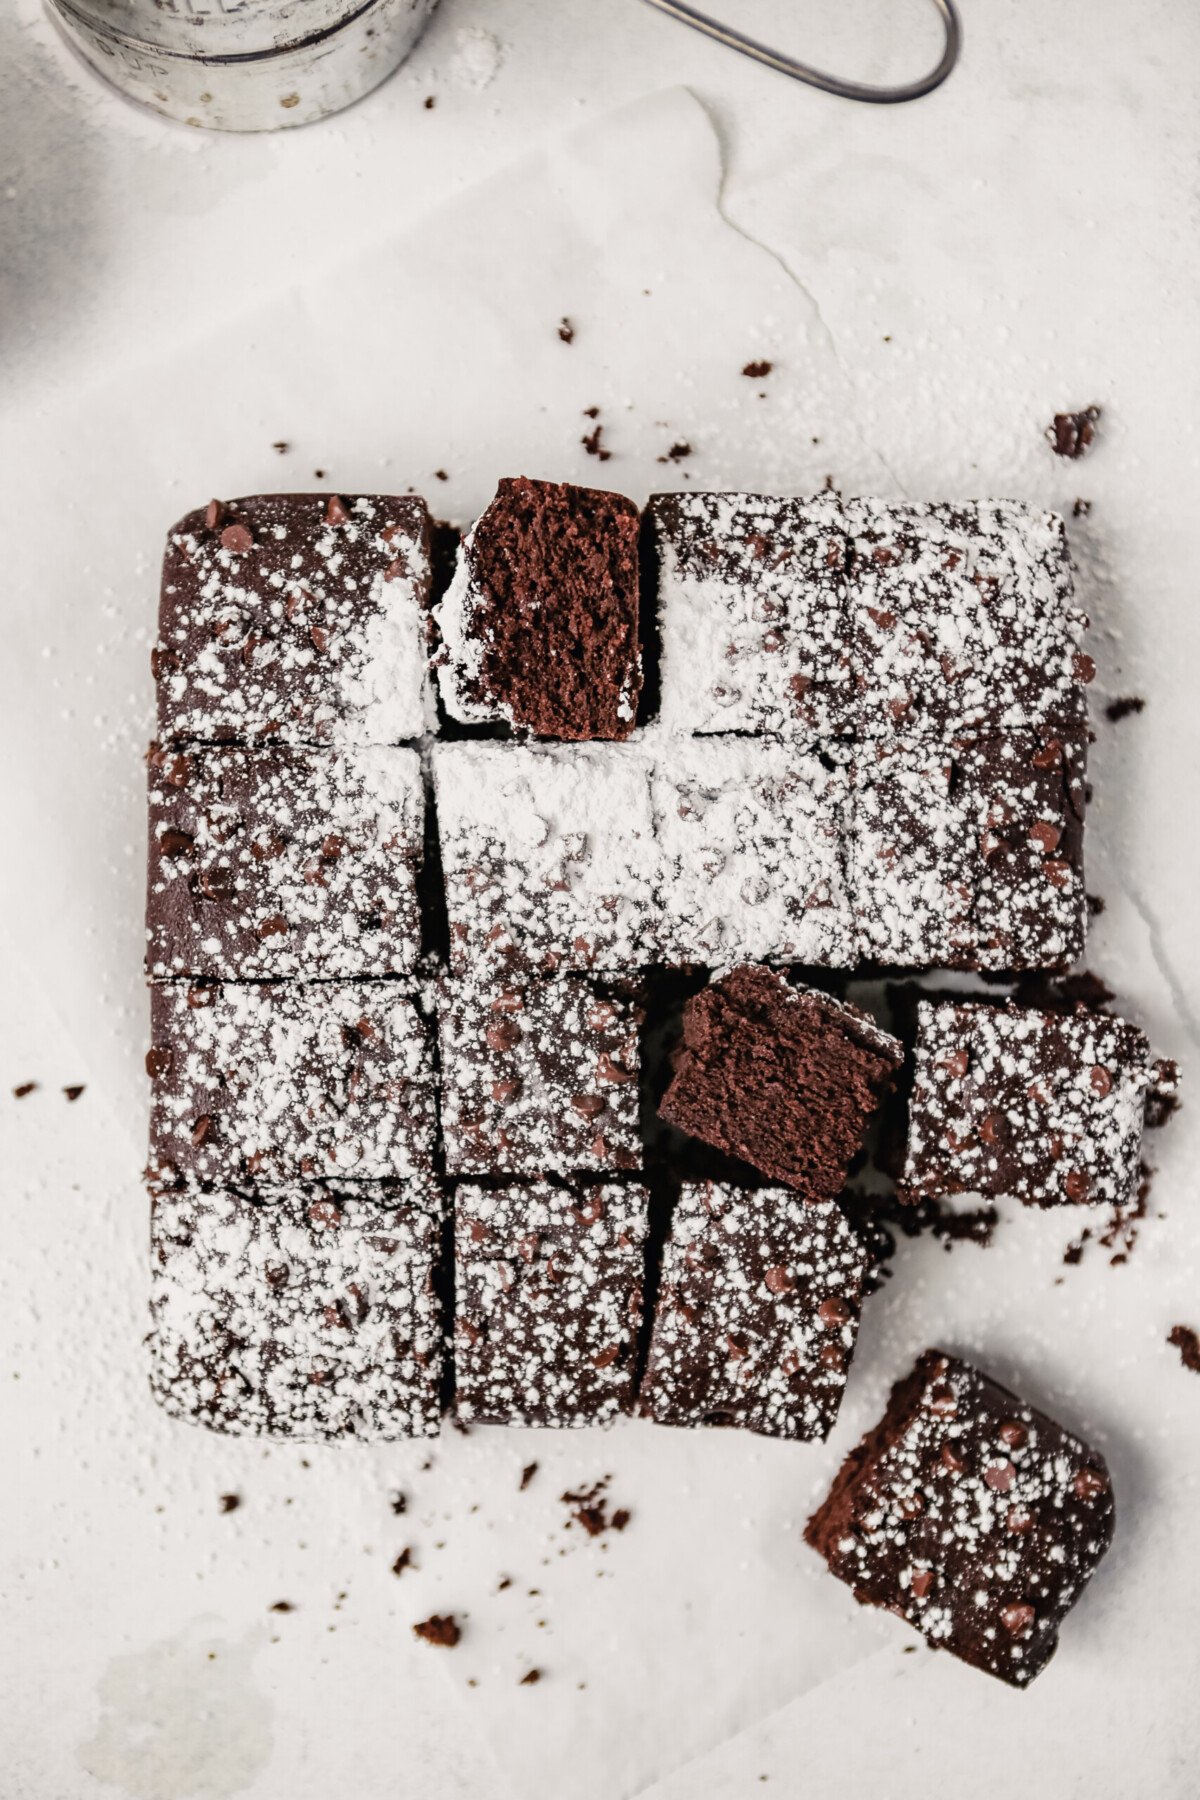 Photograph of a batch of brownies on a white surface cut into squares and dusted with powdered sugar